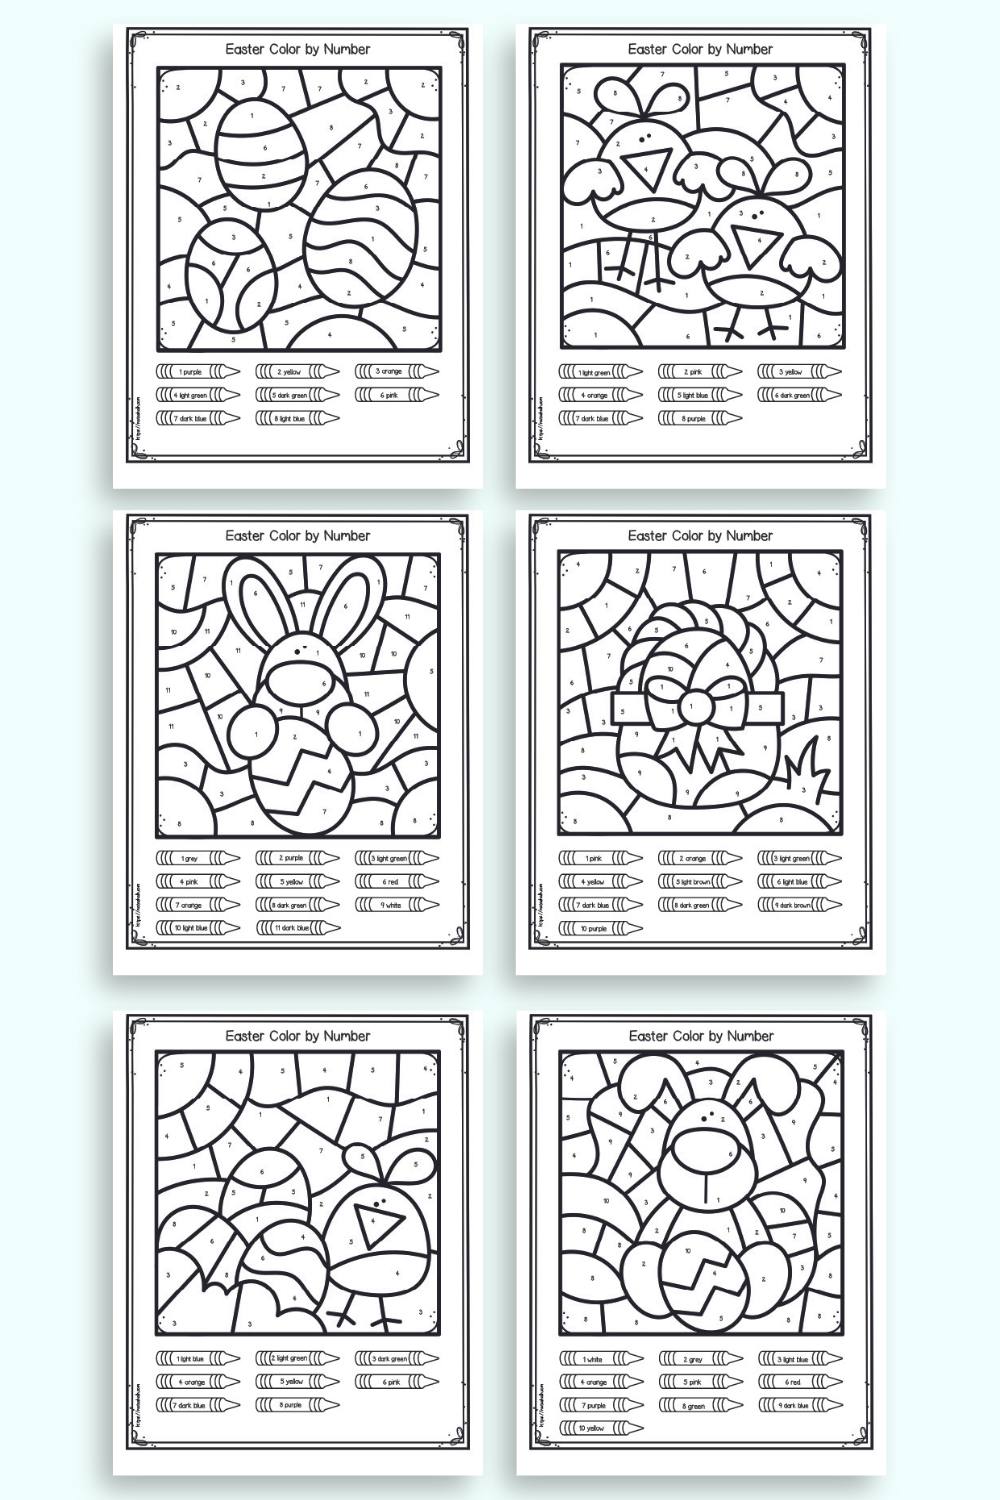 A preview of six pages of Easter color by number worksheets with numbers 1-11